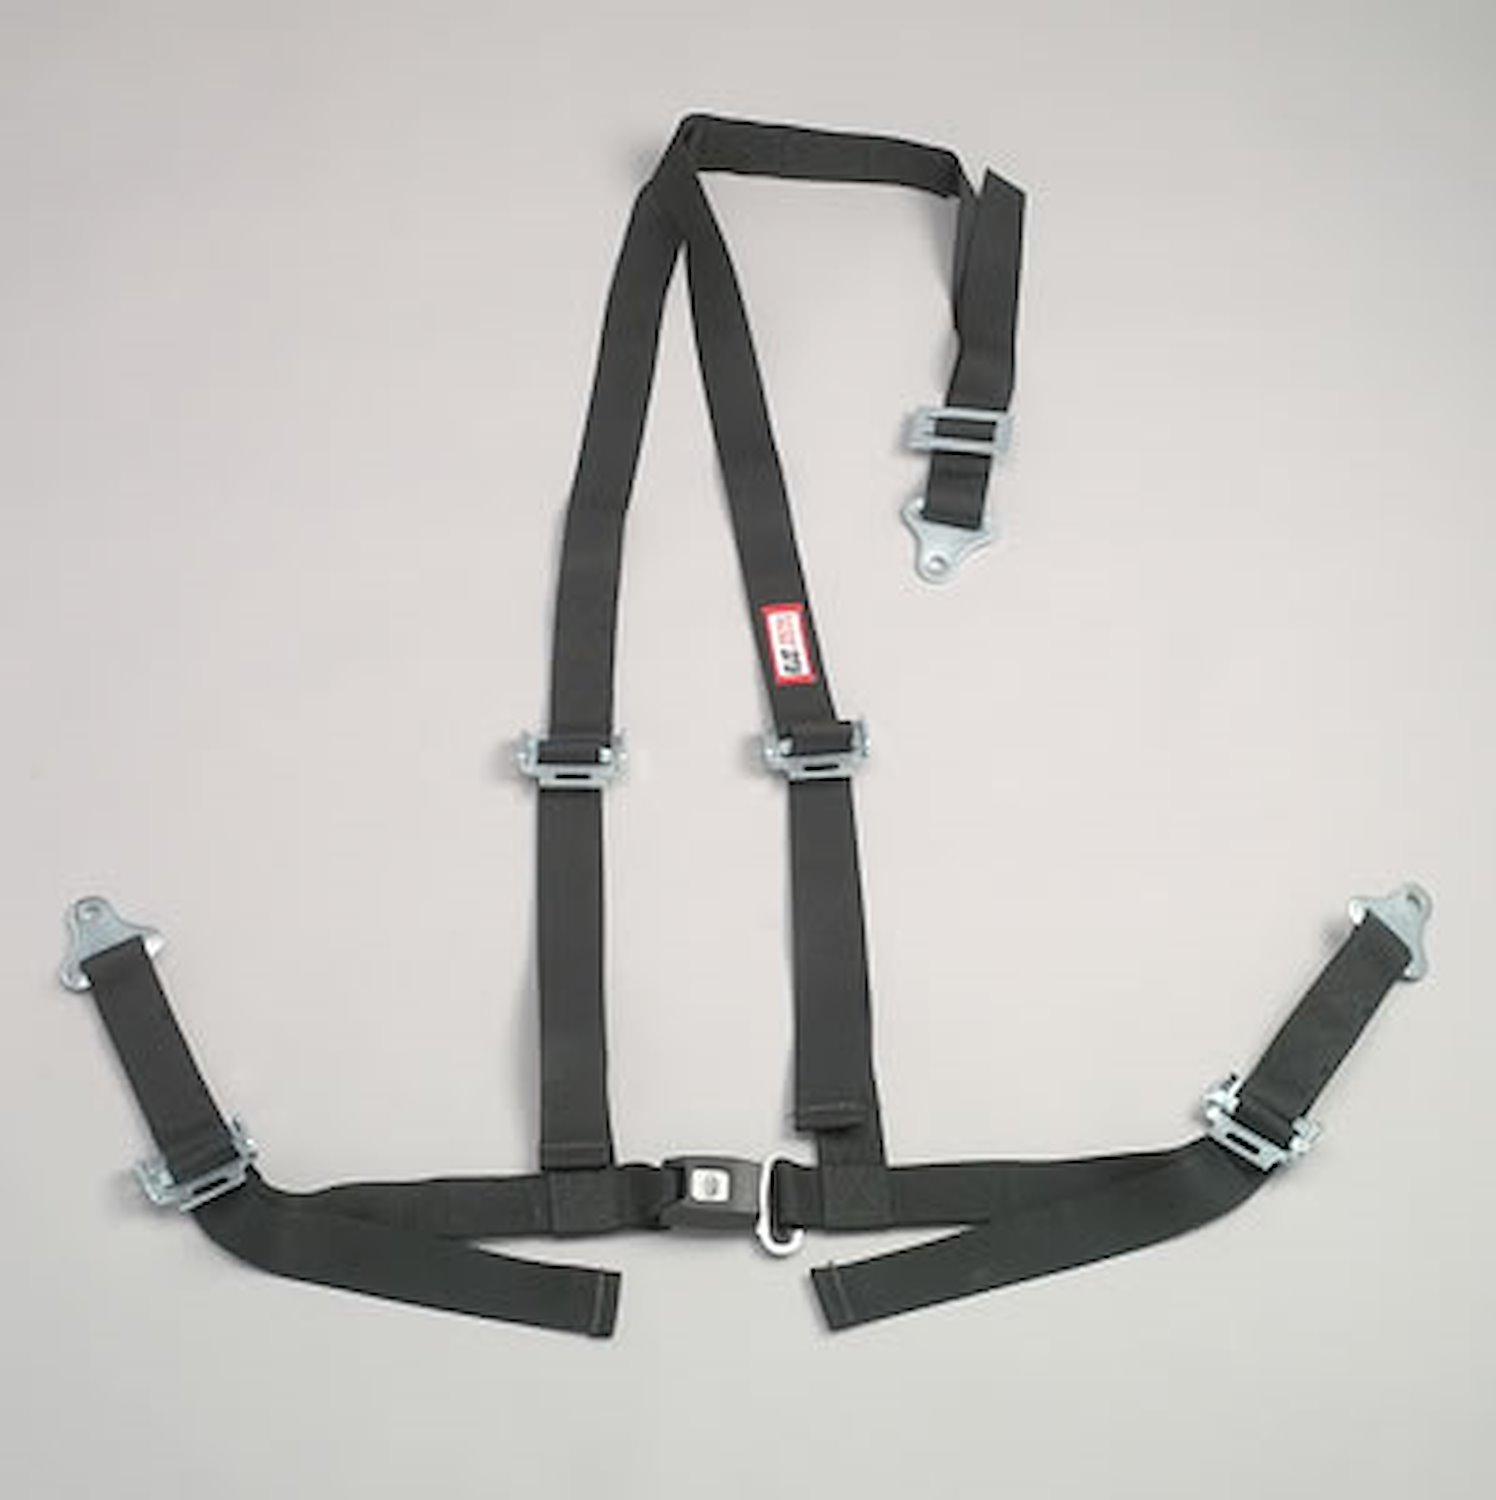 NON-SFI B&T HARNESS 2 PULL UP Lap Belt 2 S. H. Individual ROLL BAR Mount ALL WRAP ENDS w/STERNUM STRAP OD GREEN